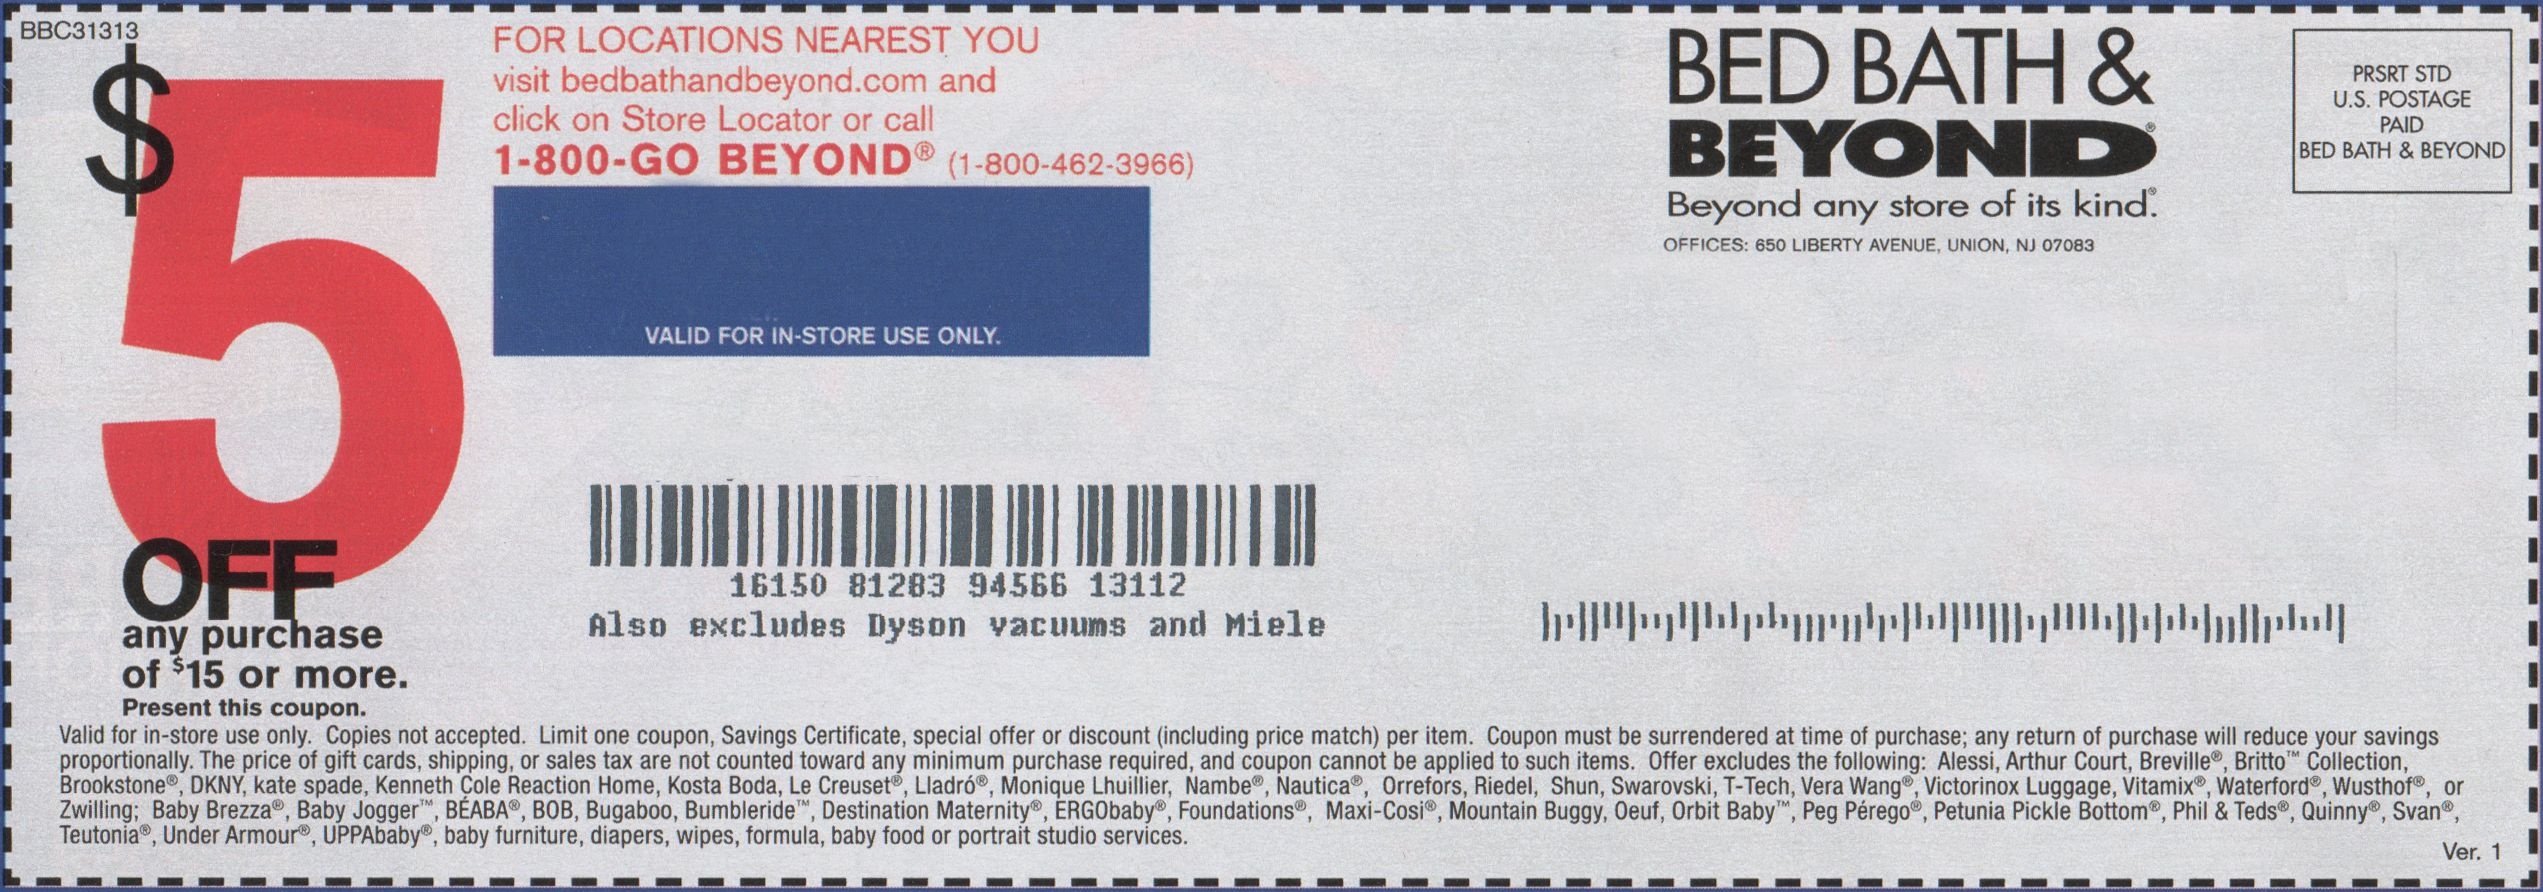 Getting Valid Bed Bath 20 Coupon Printable, Bed Bath &amp;amp; Beyond Inc Is - Free Printable Bed Bath And Beyond 20 Off Coupon